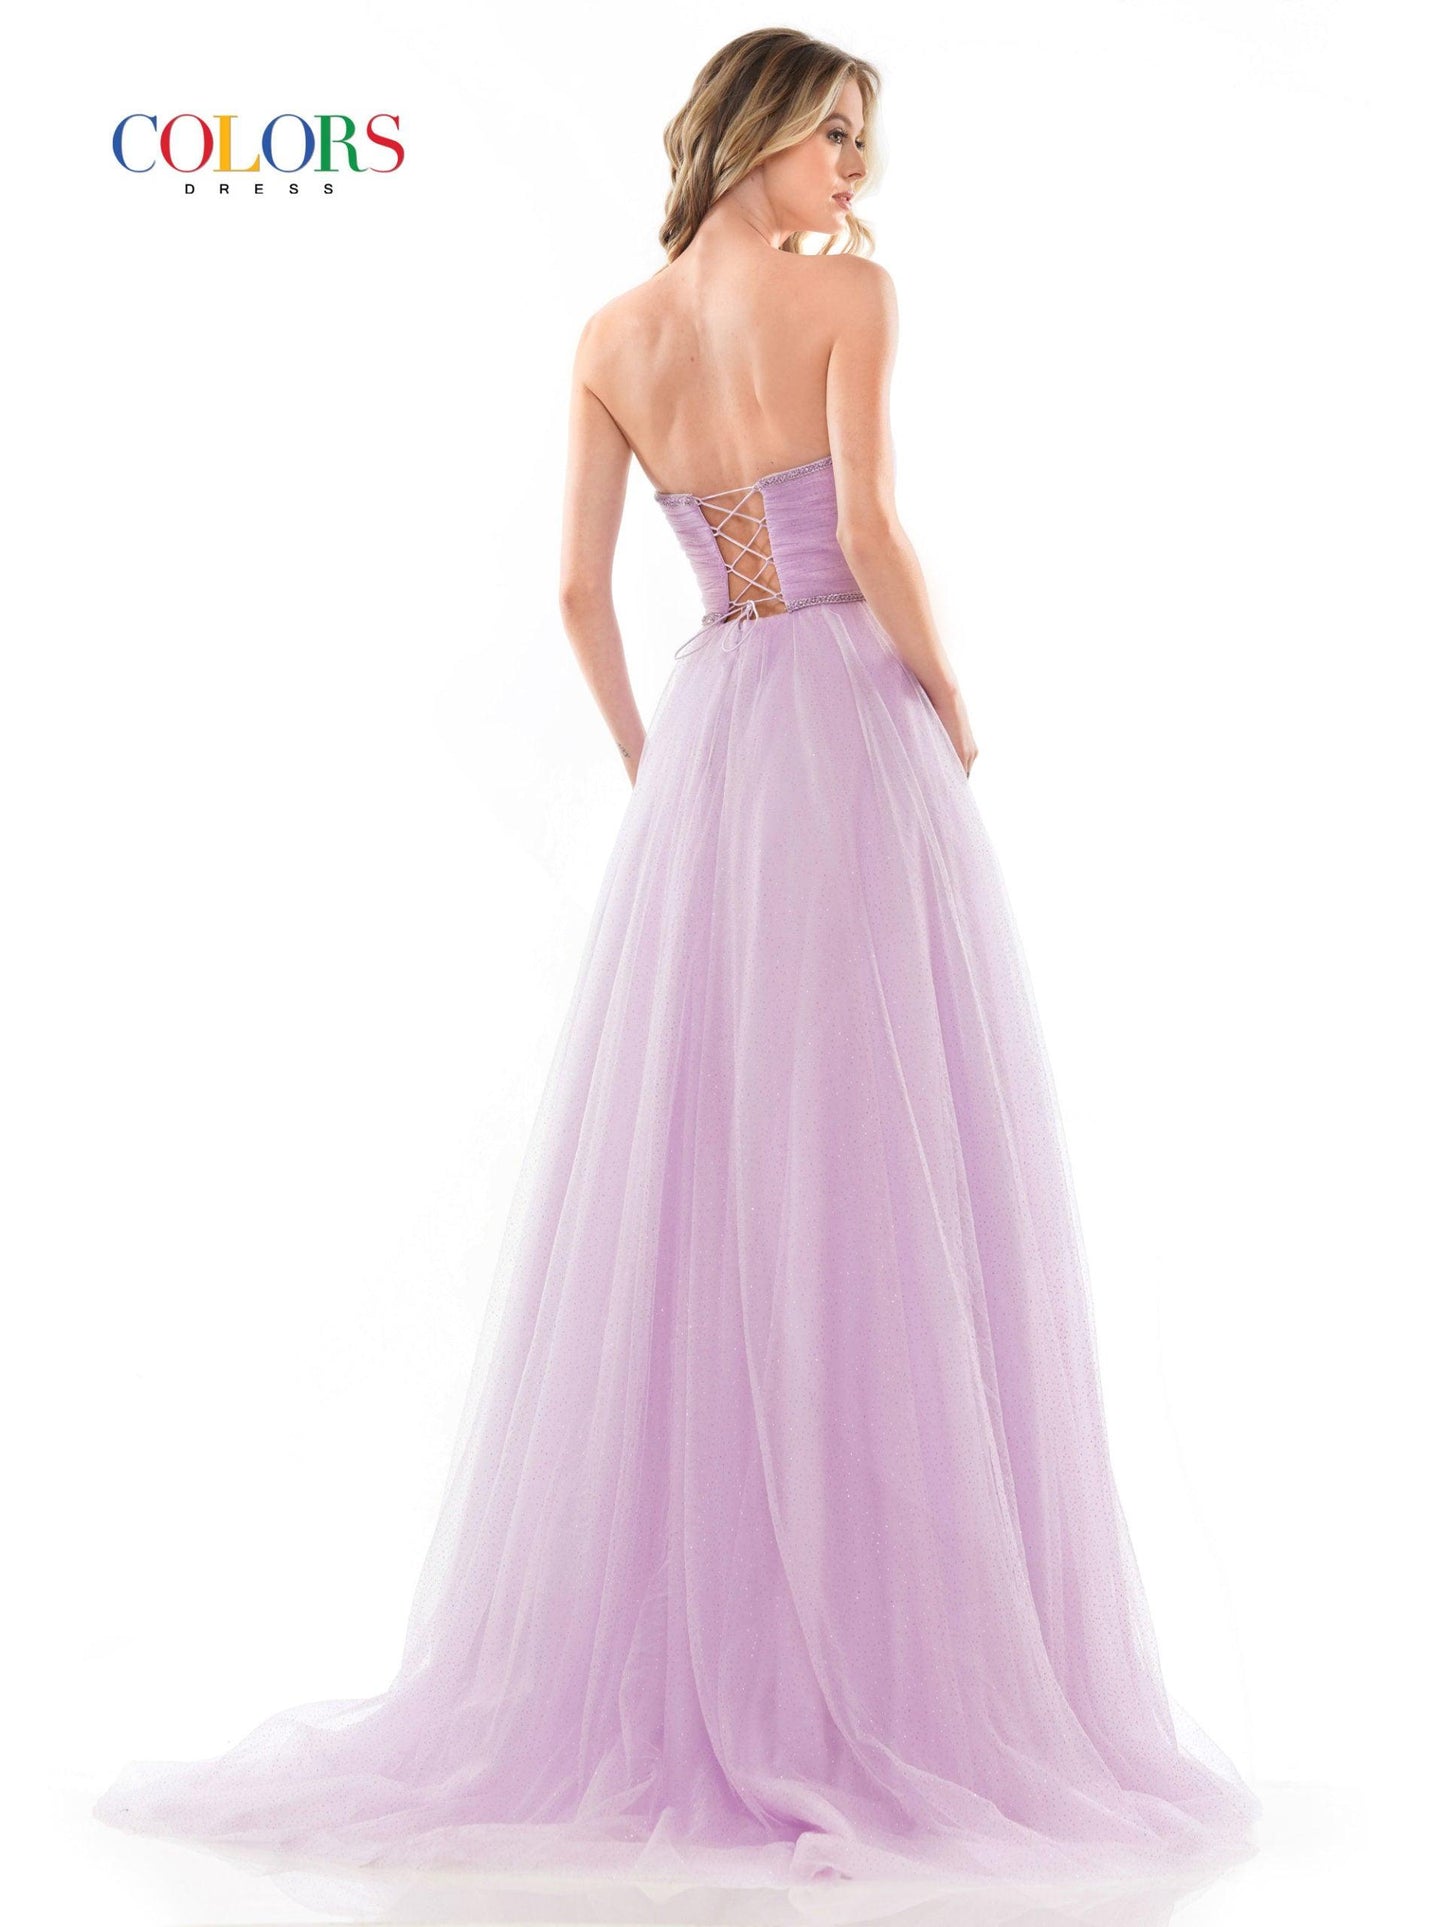 Colors Long Formal Strapless Prom Ball Gown 2703 - The Dress Outlet